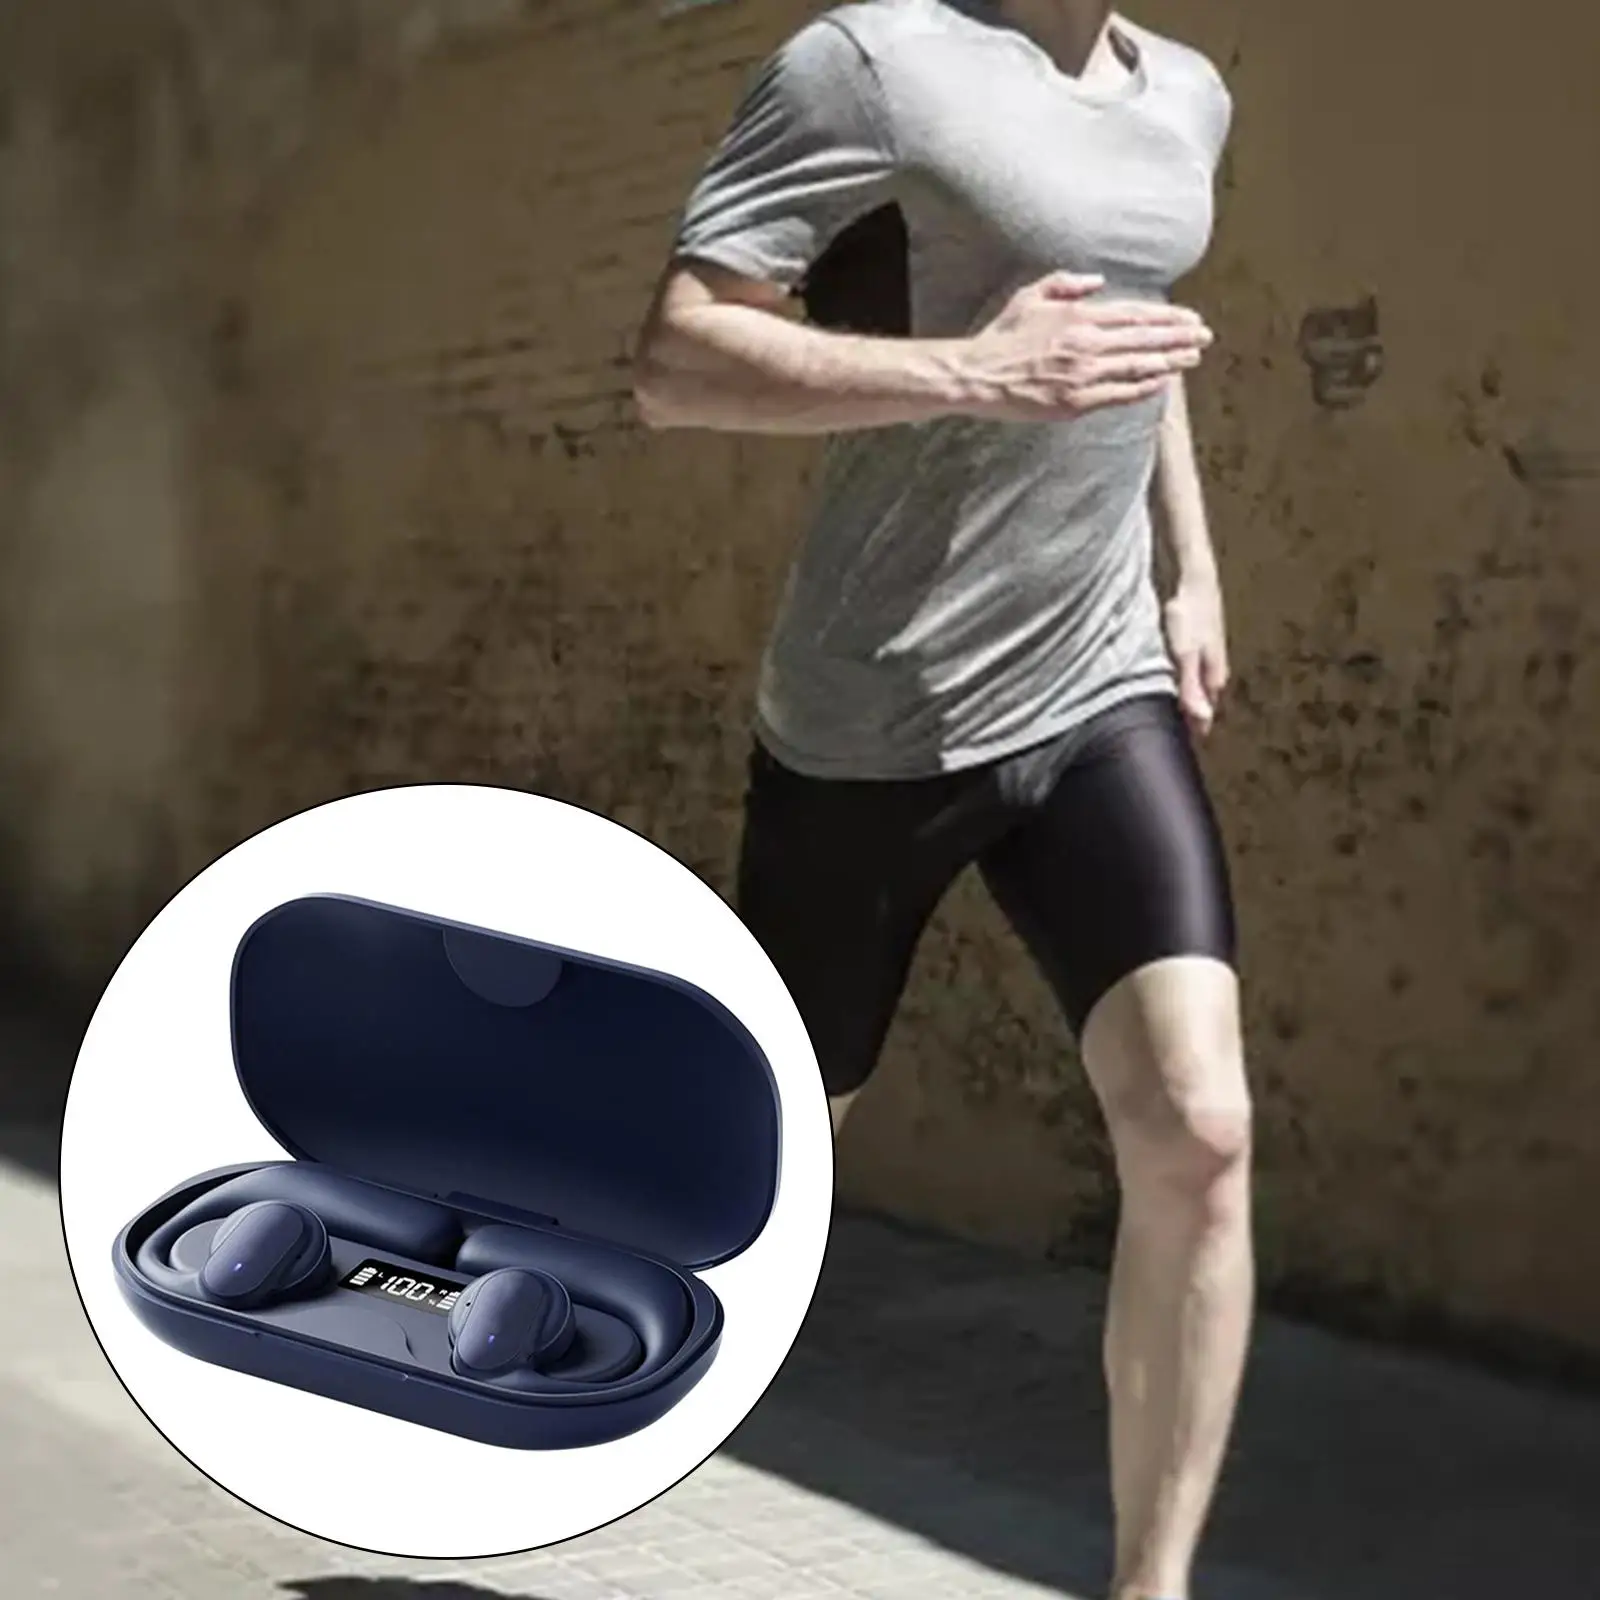 Ear Hooks Earphones Noise Reduction Bluetooth Headphones Headsets Wireless Earbuds for Sports Gym Running Working Gaming Workout